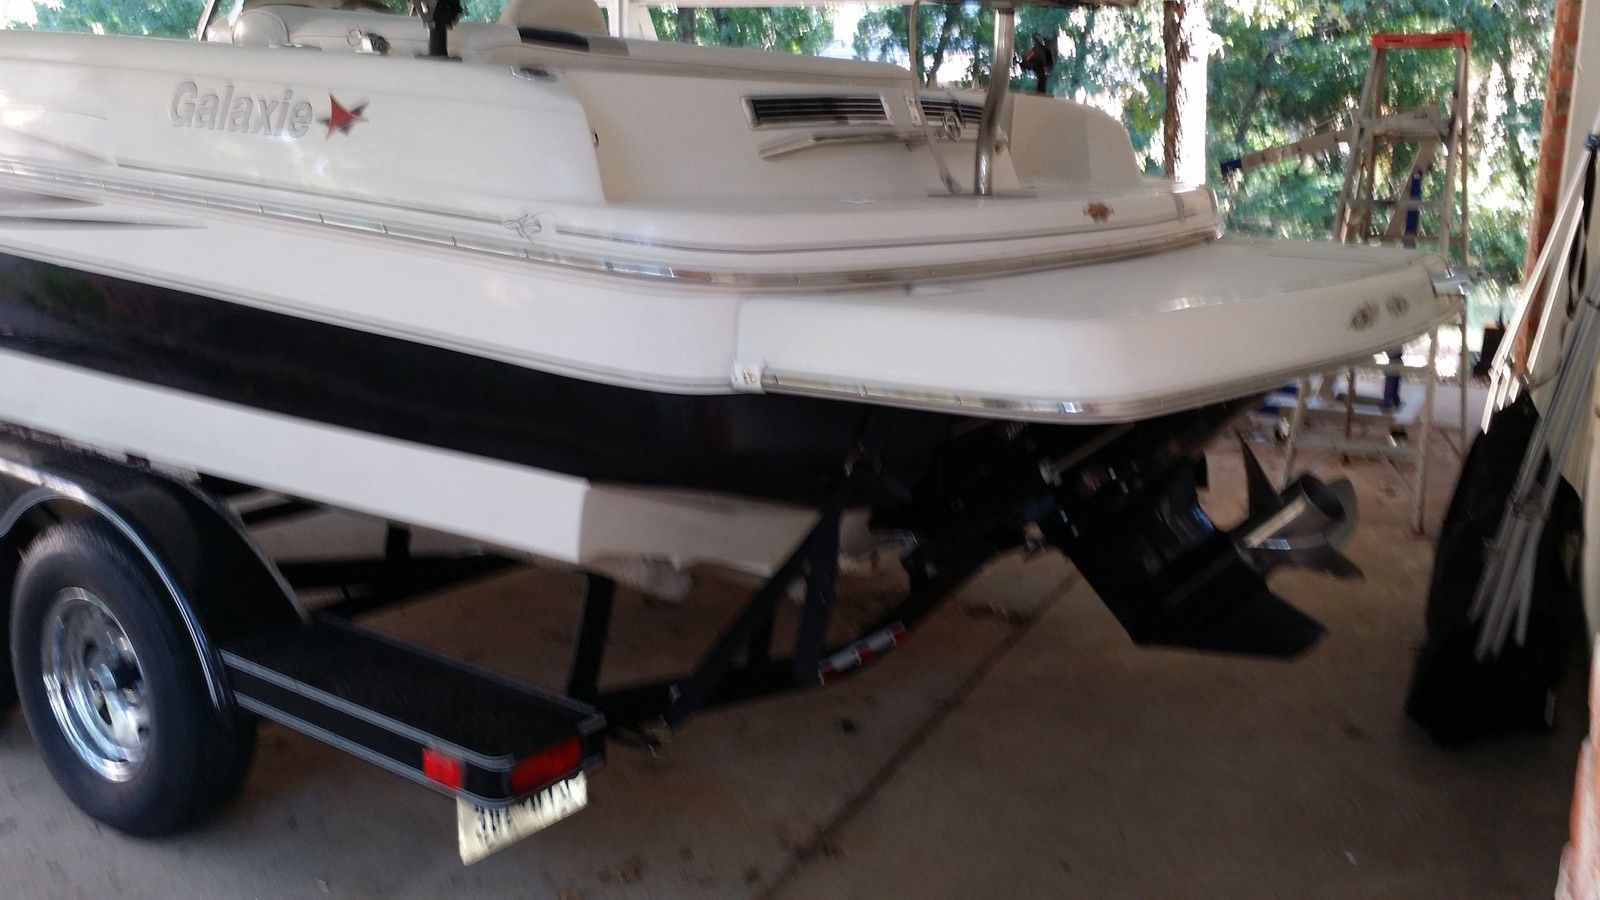 Galaxy 22 Foot Deck Boat 2007 for sale for $17,000 - Boats ...